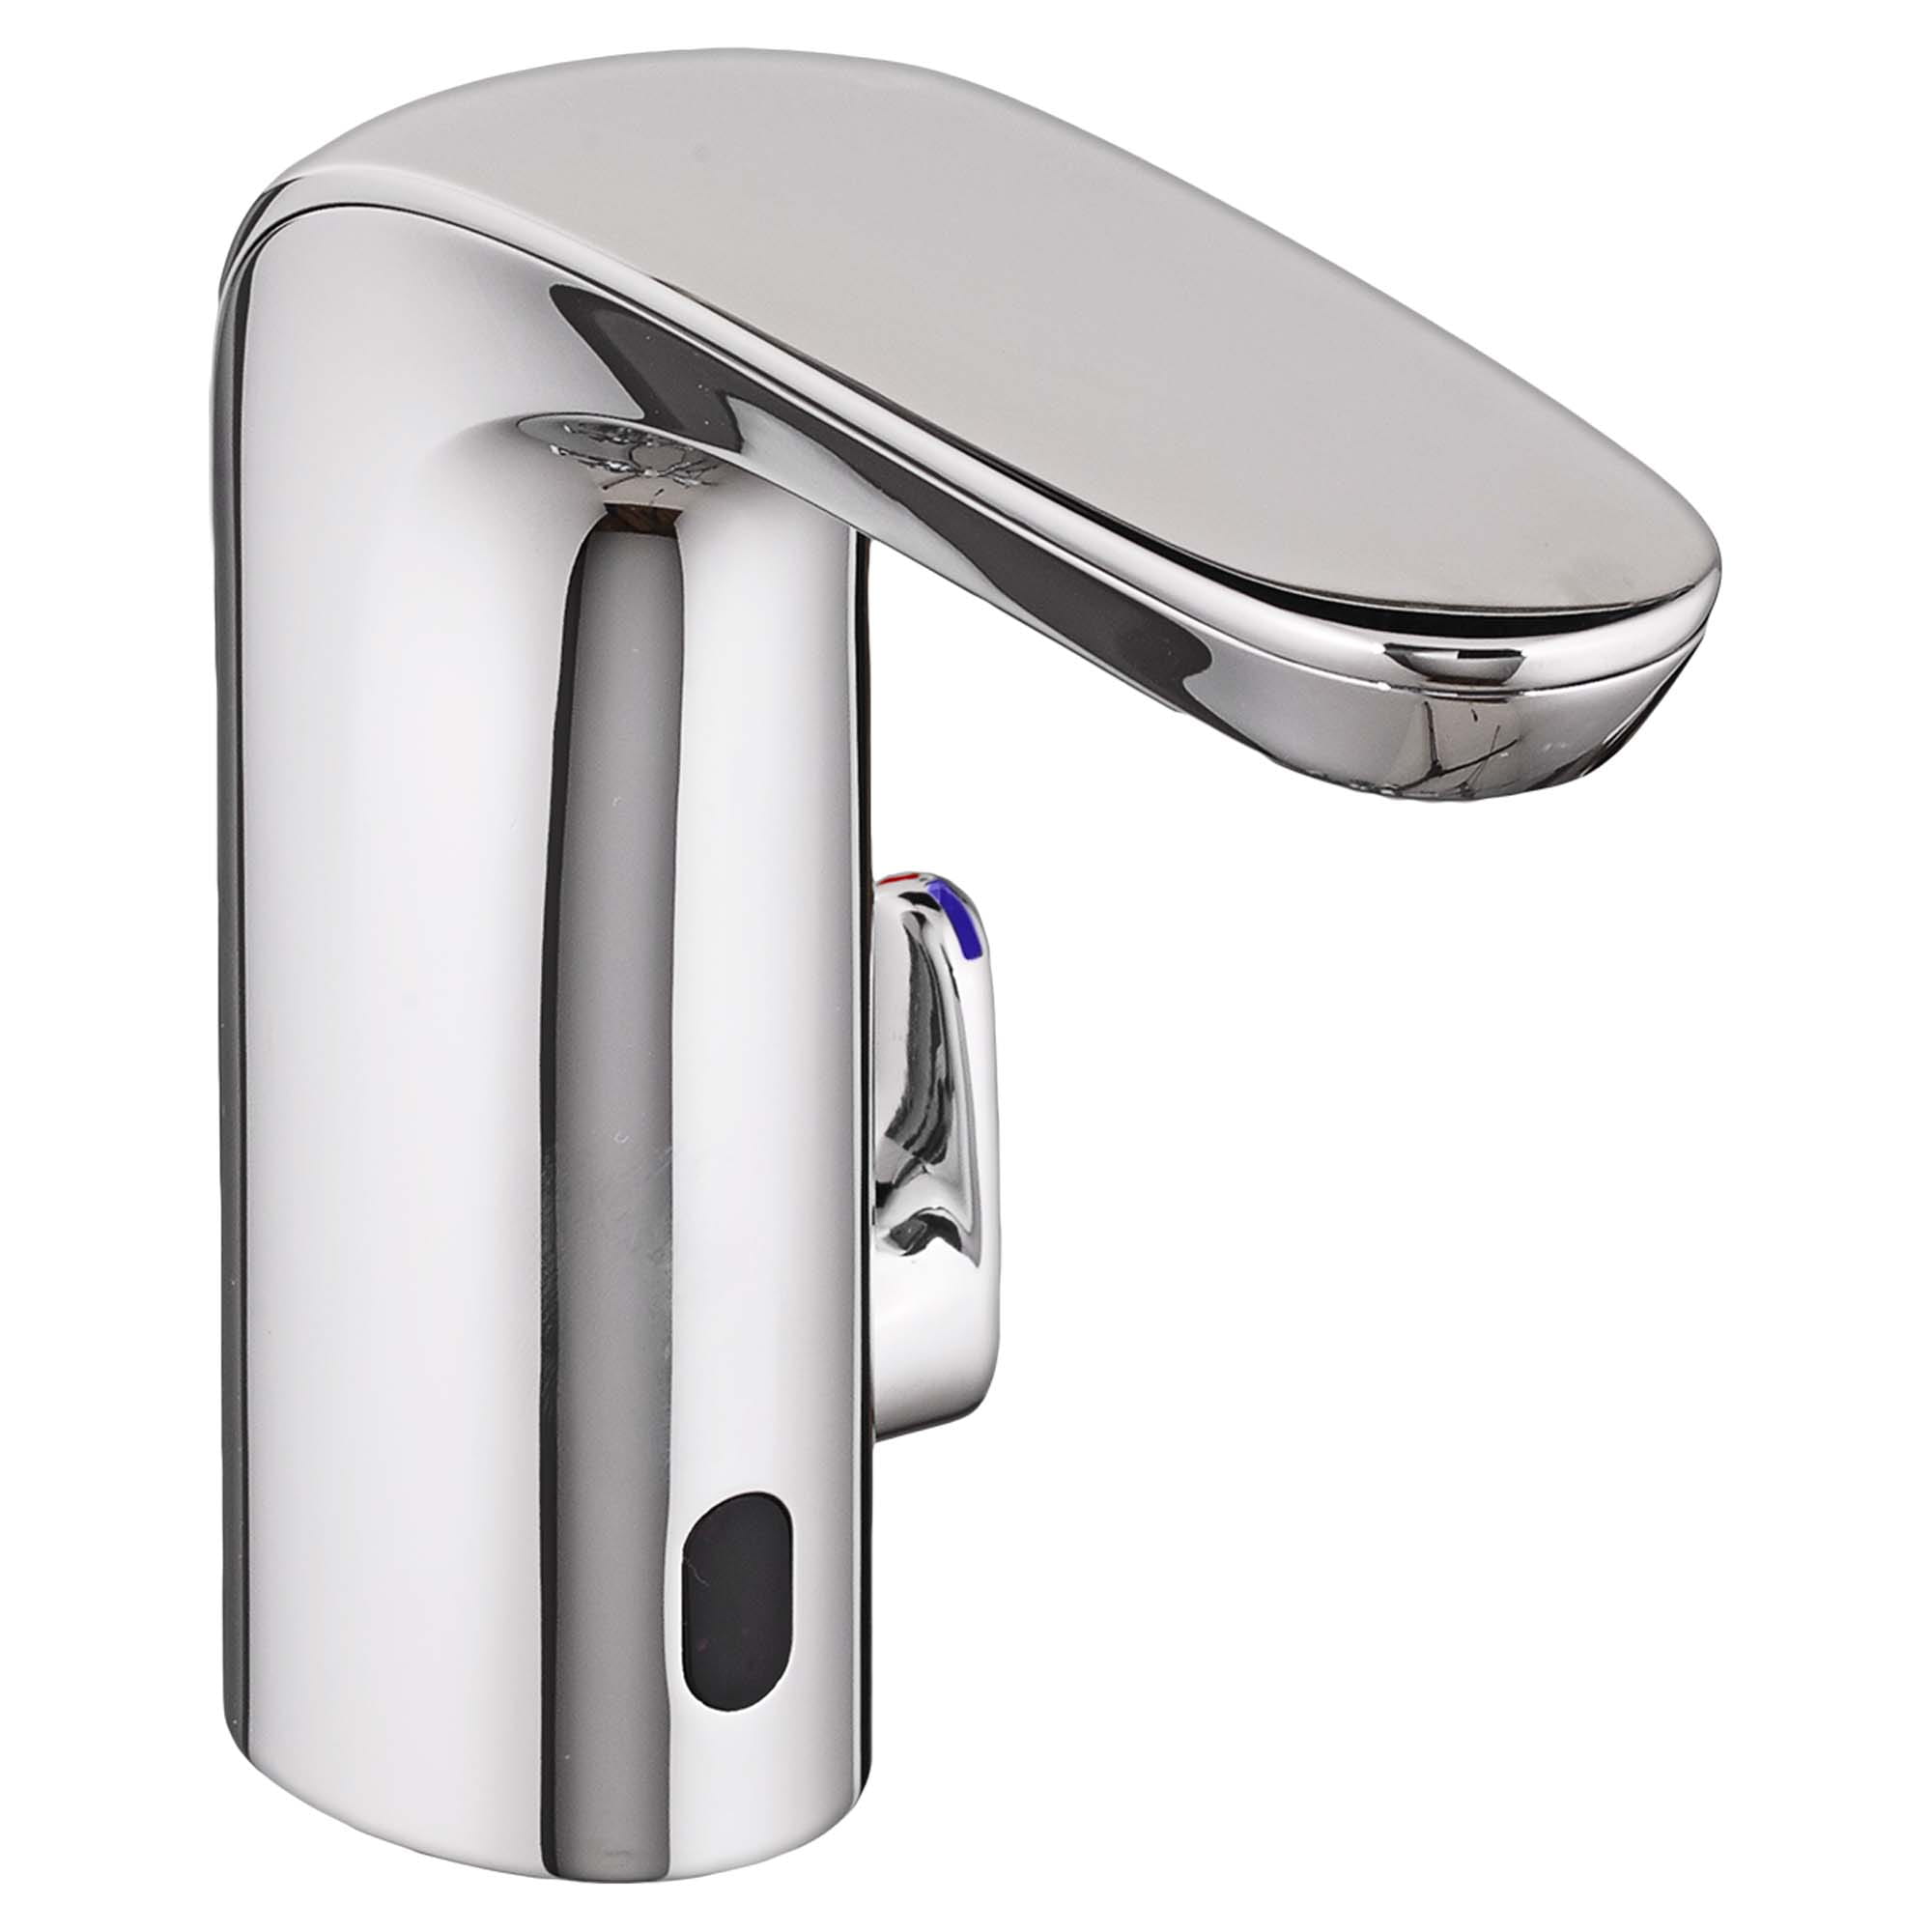 NextGen™ Selectronic® Touchless Faucet, Base Model With SmarTherm Safety Shut-Off + ADM, 1.5 gpm/5.7 Lpm